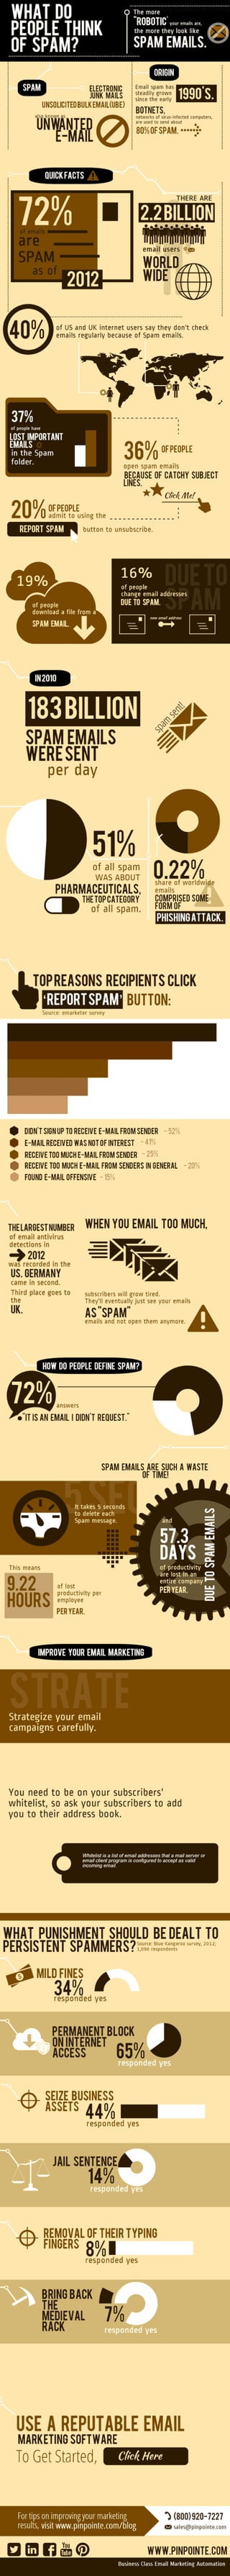 Infographic: What do people think of SPAM?